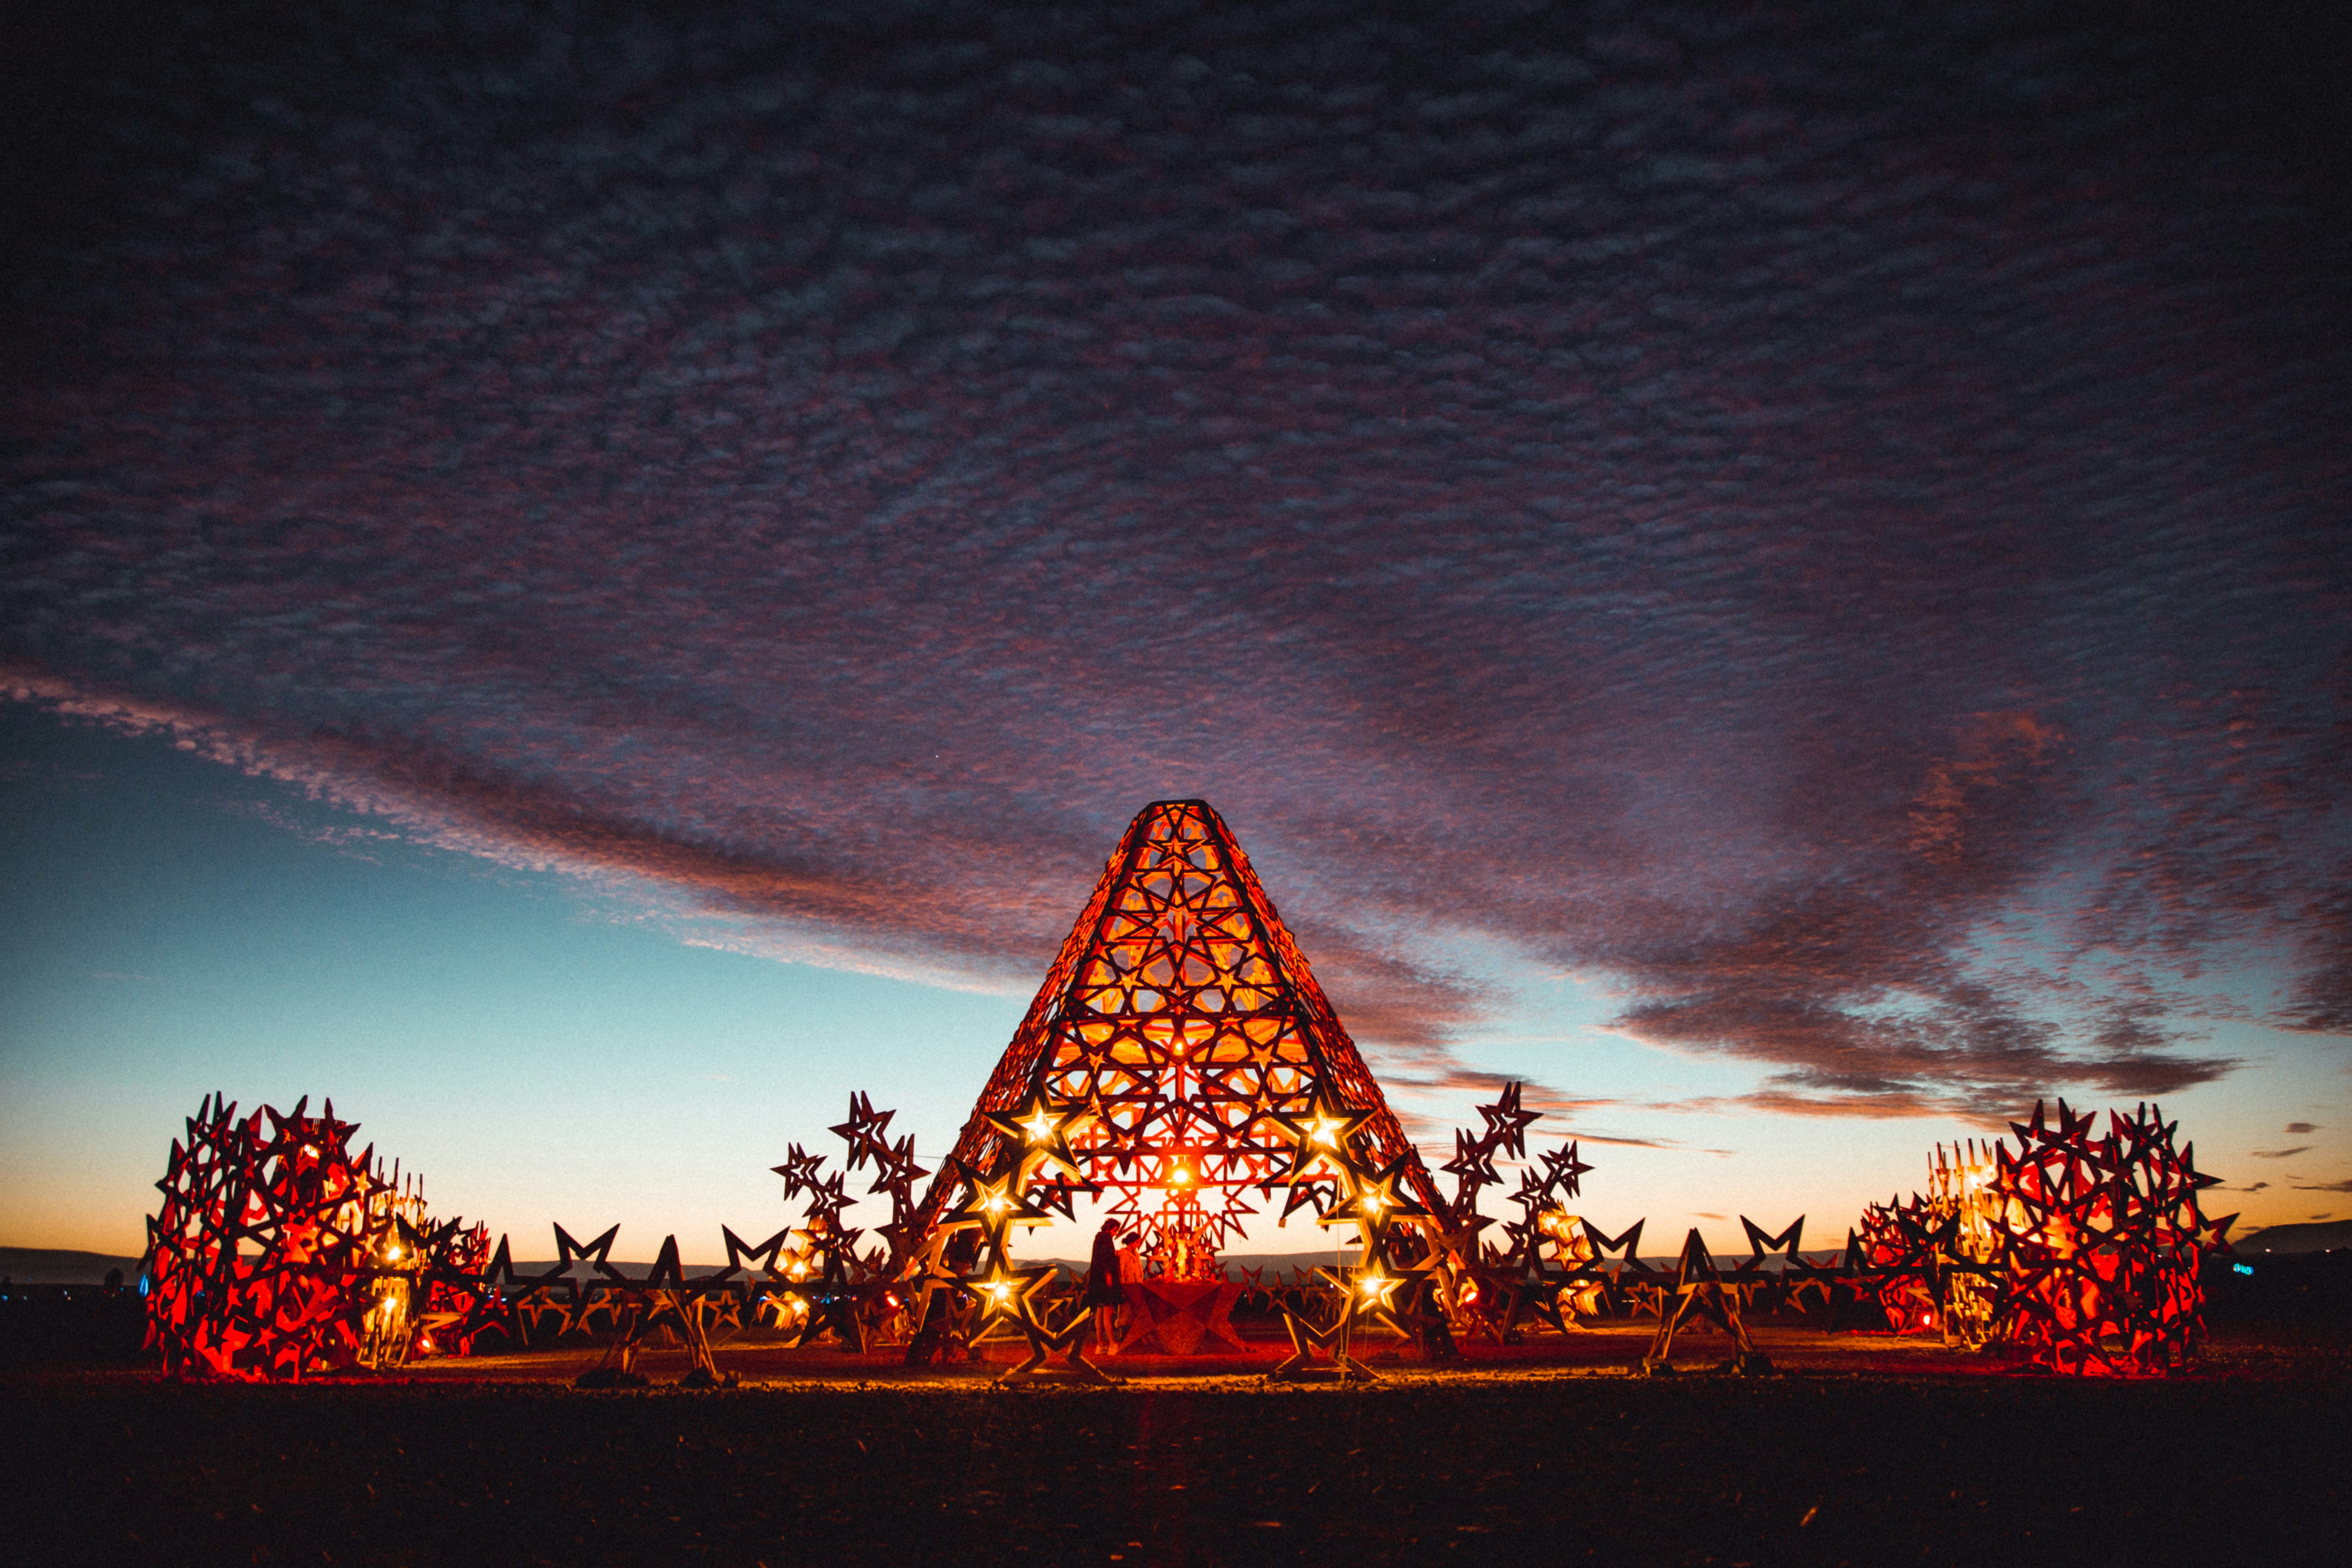 The sun rises over the temple on Saturday morning at AfrikaBurn 2019.